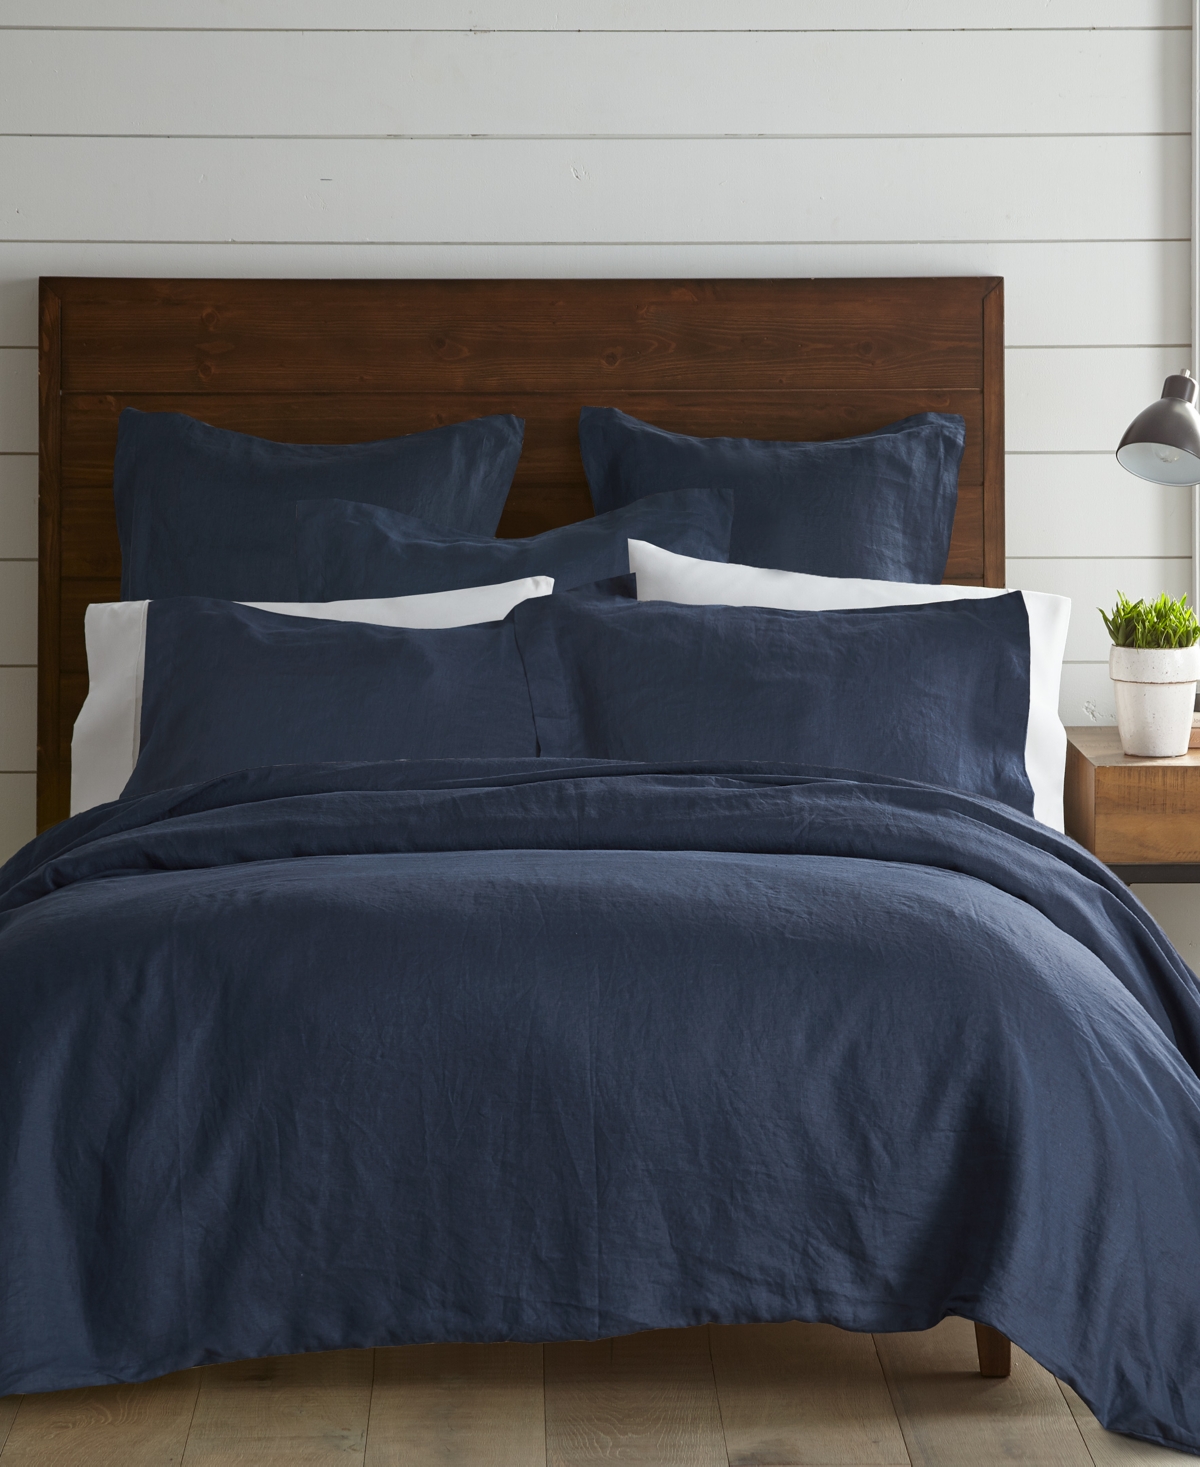 Levtex Washed Linen Solid Duvet Cover, Full/queen In Blue